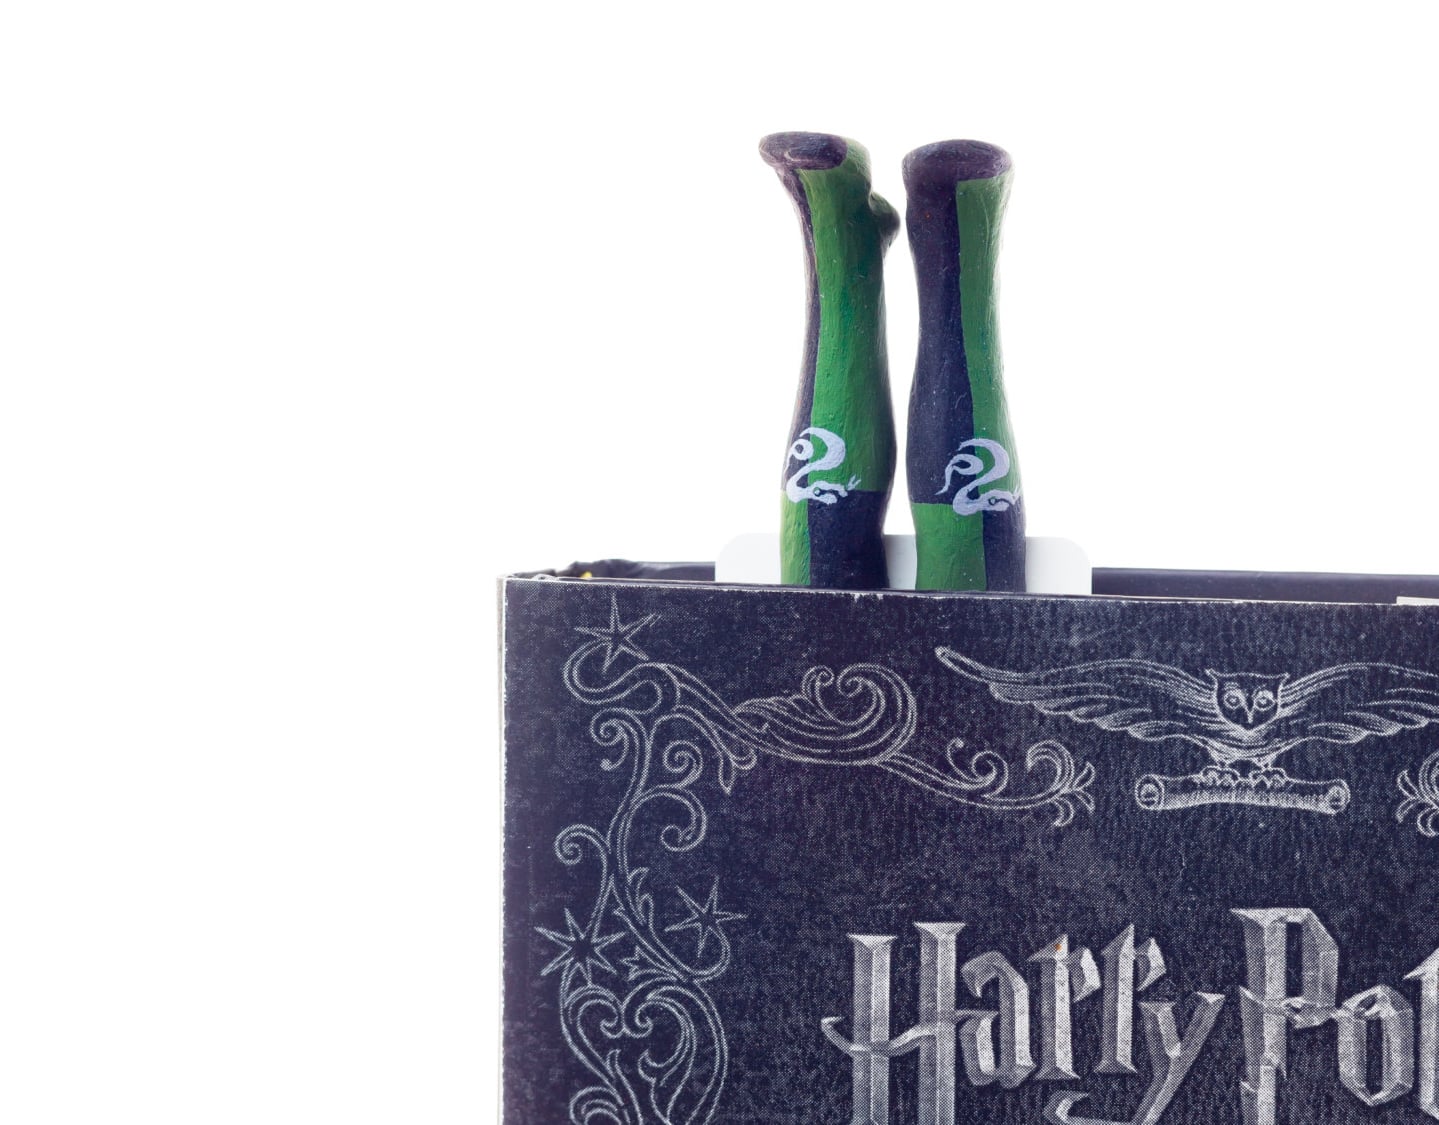 20+ Awesome Slytherin Gifts That'll Wow Slytherin of All Ages, by GiftOMG